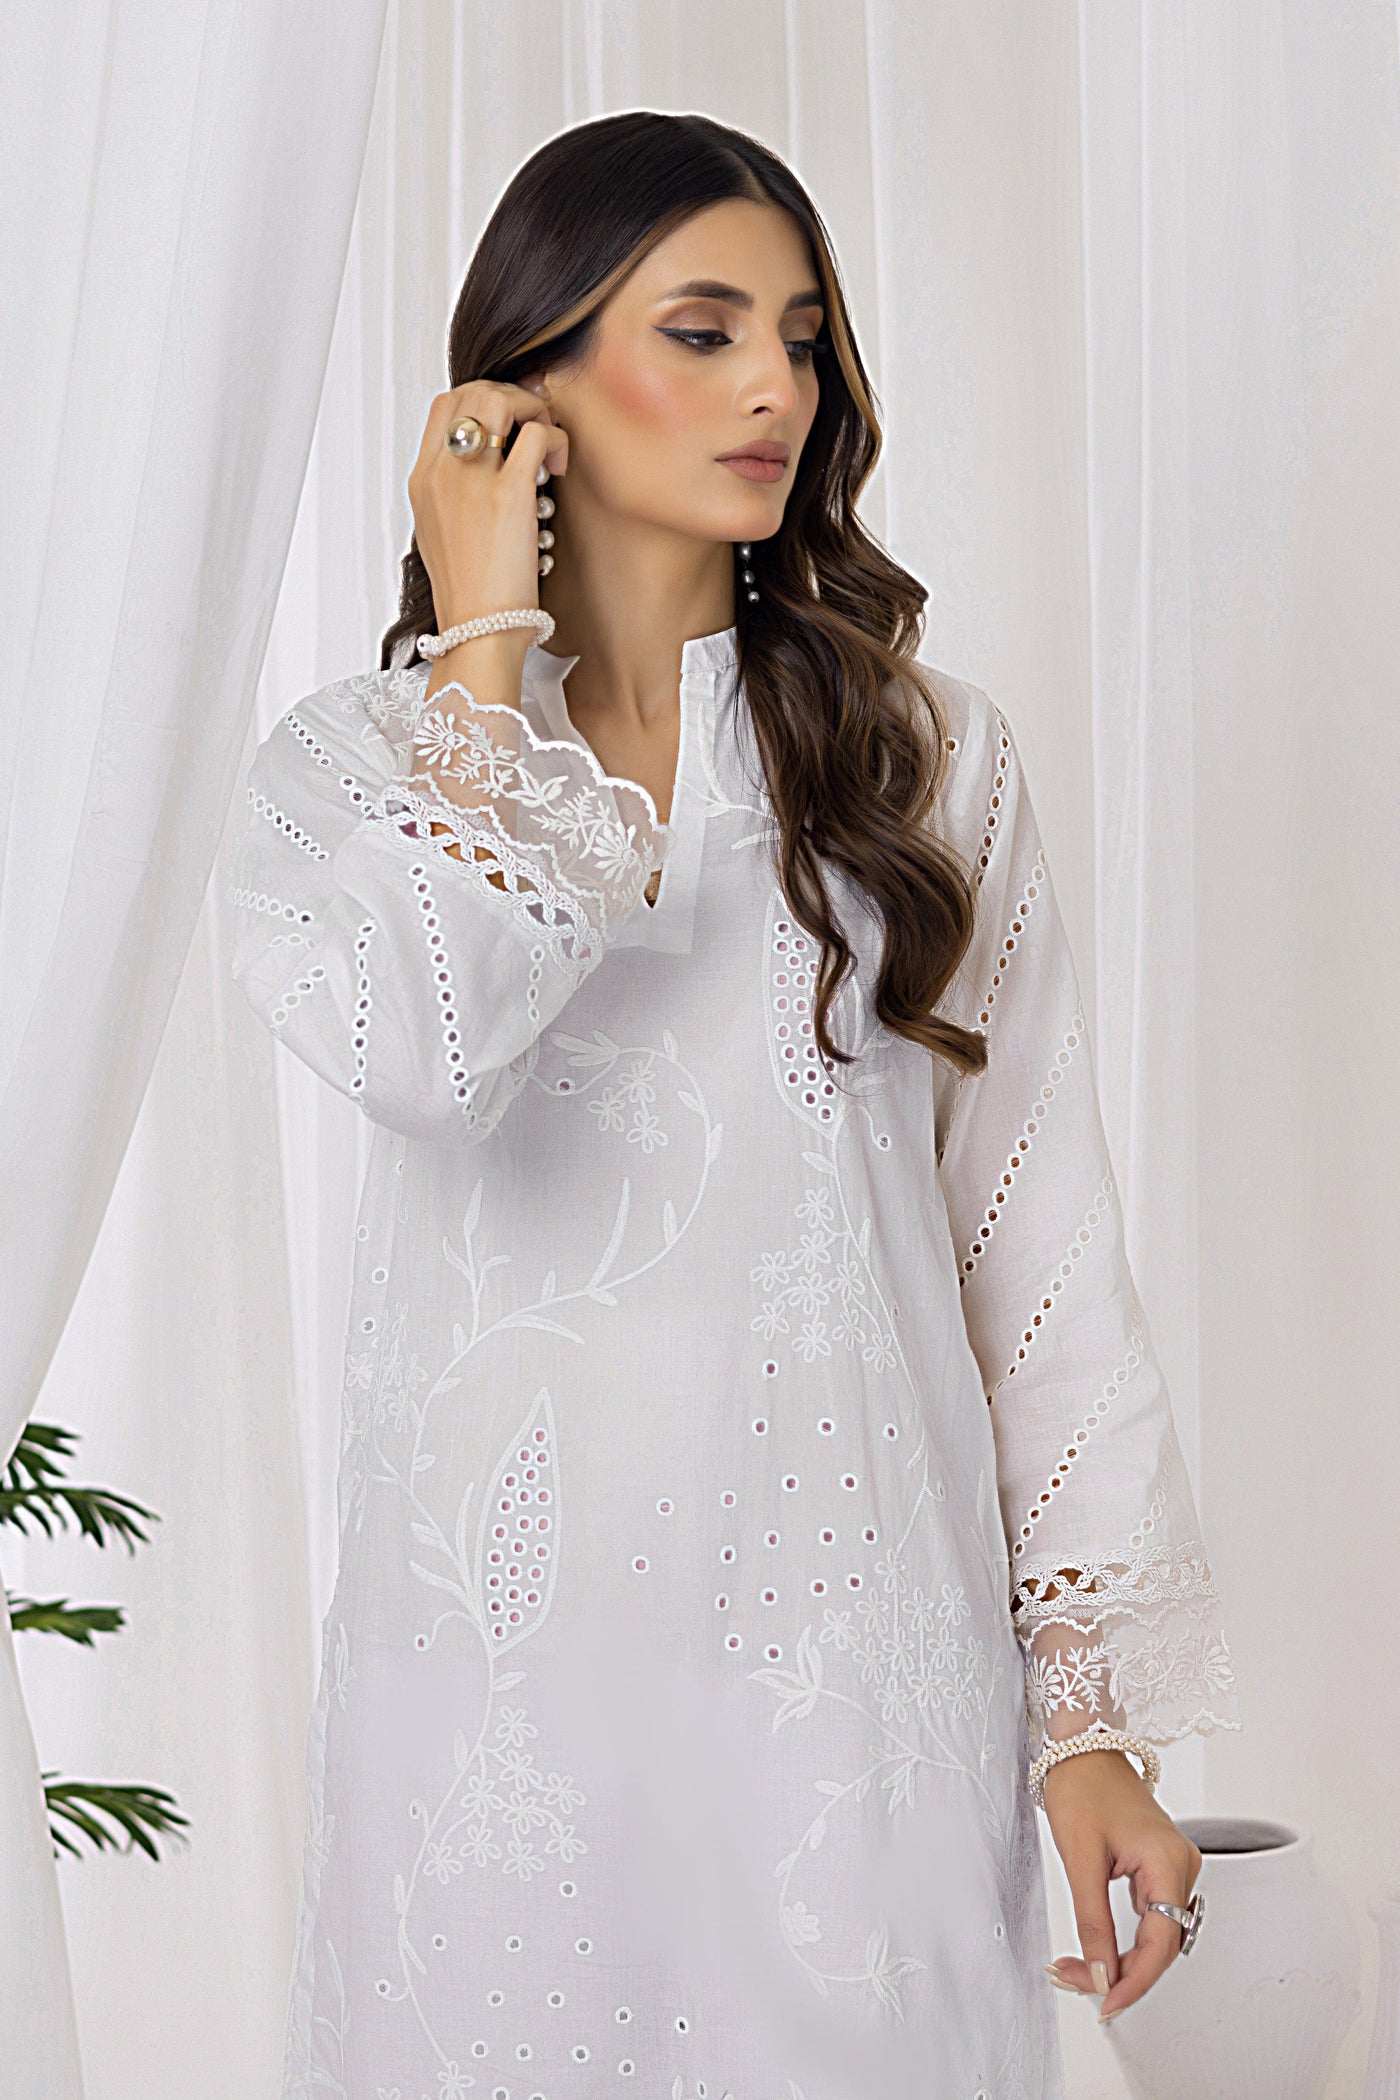 Lakhany 01 Piece Ready to Wear Embroidered Shirt - LG-AM-0026